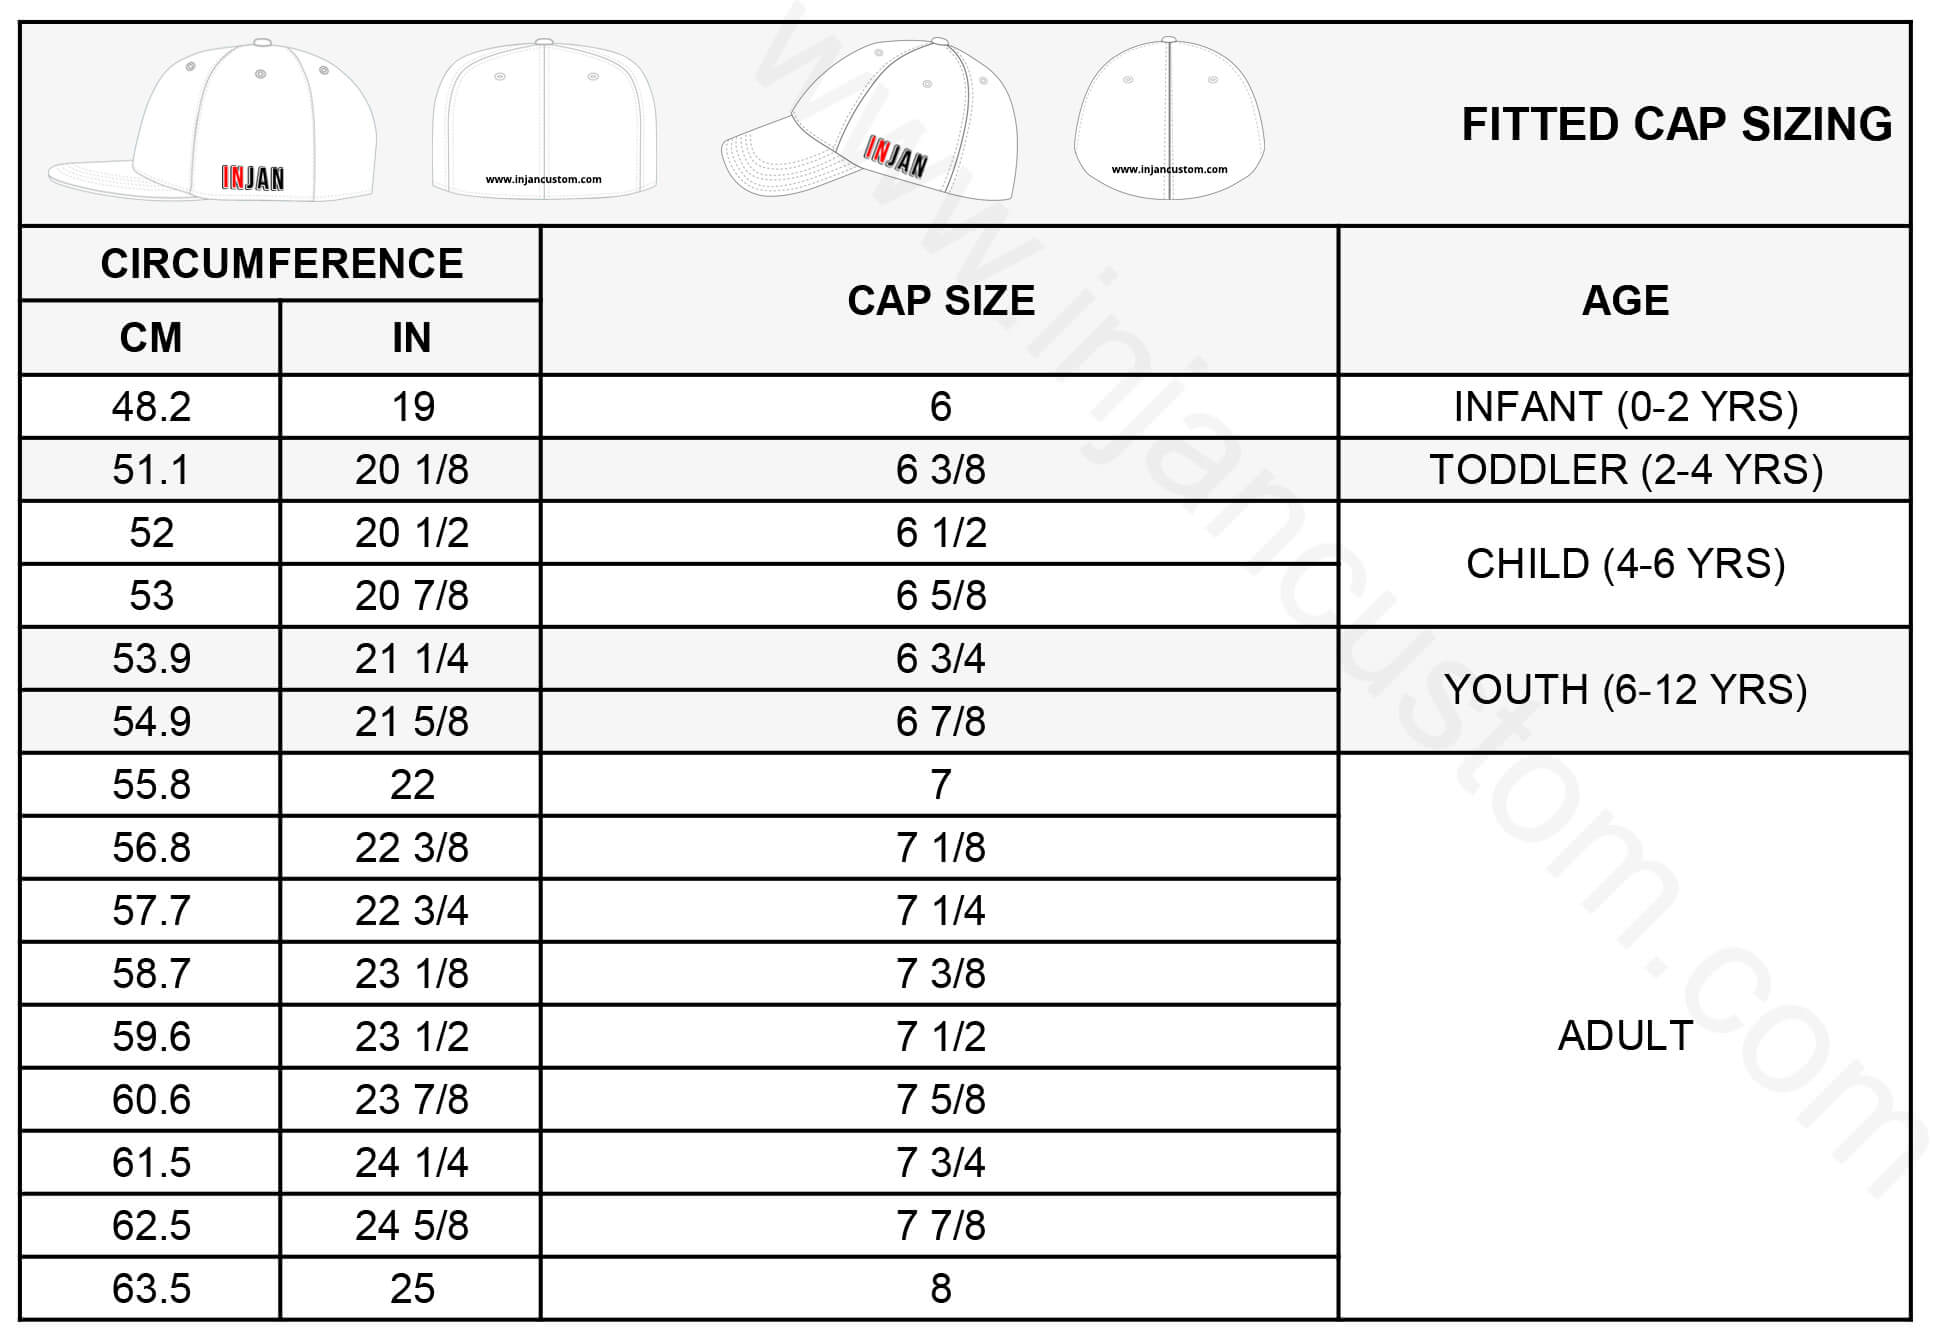 INJAN-FITTED-CAP-SIZING-001